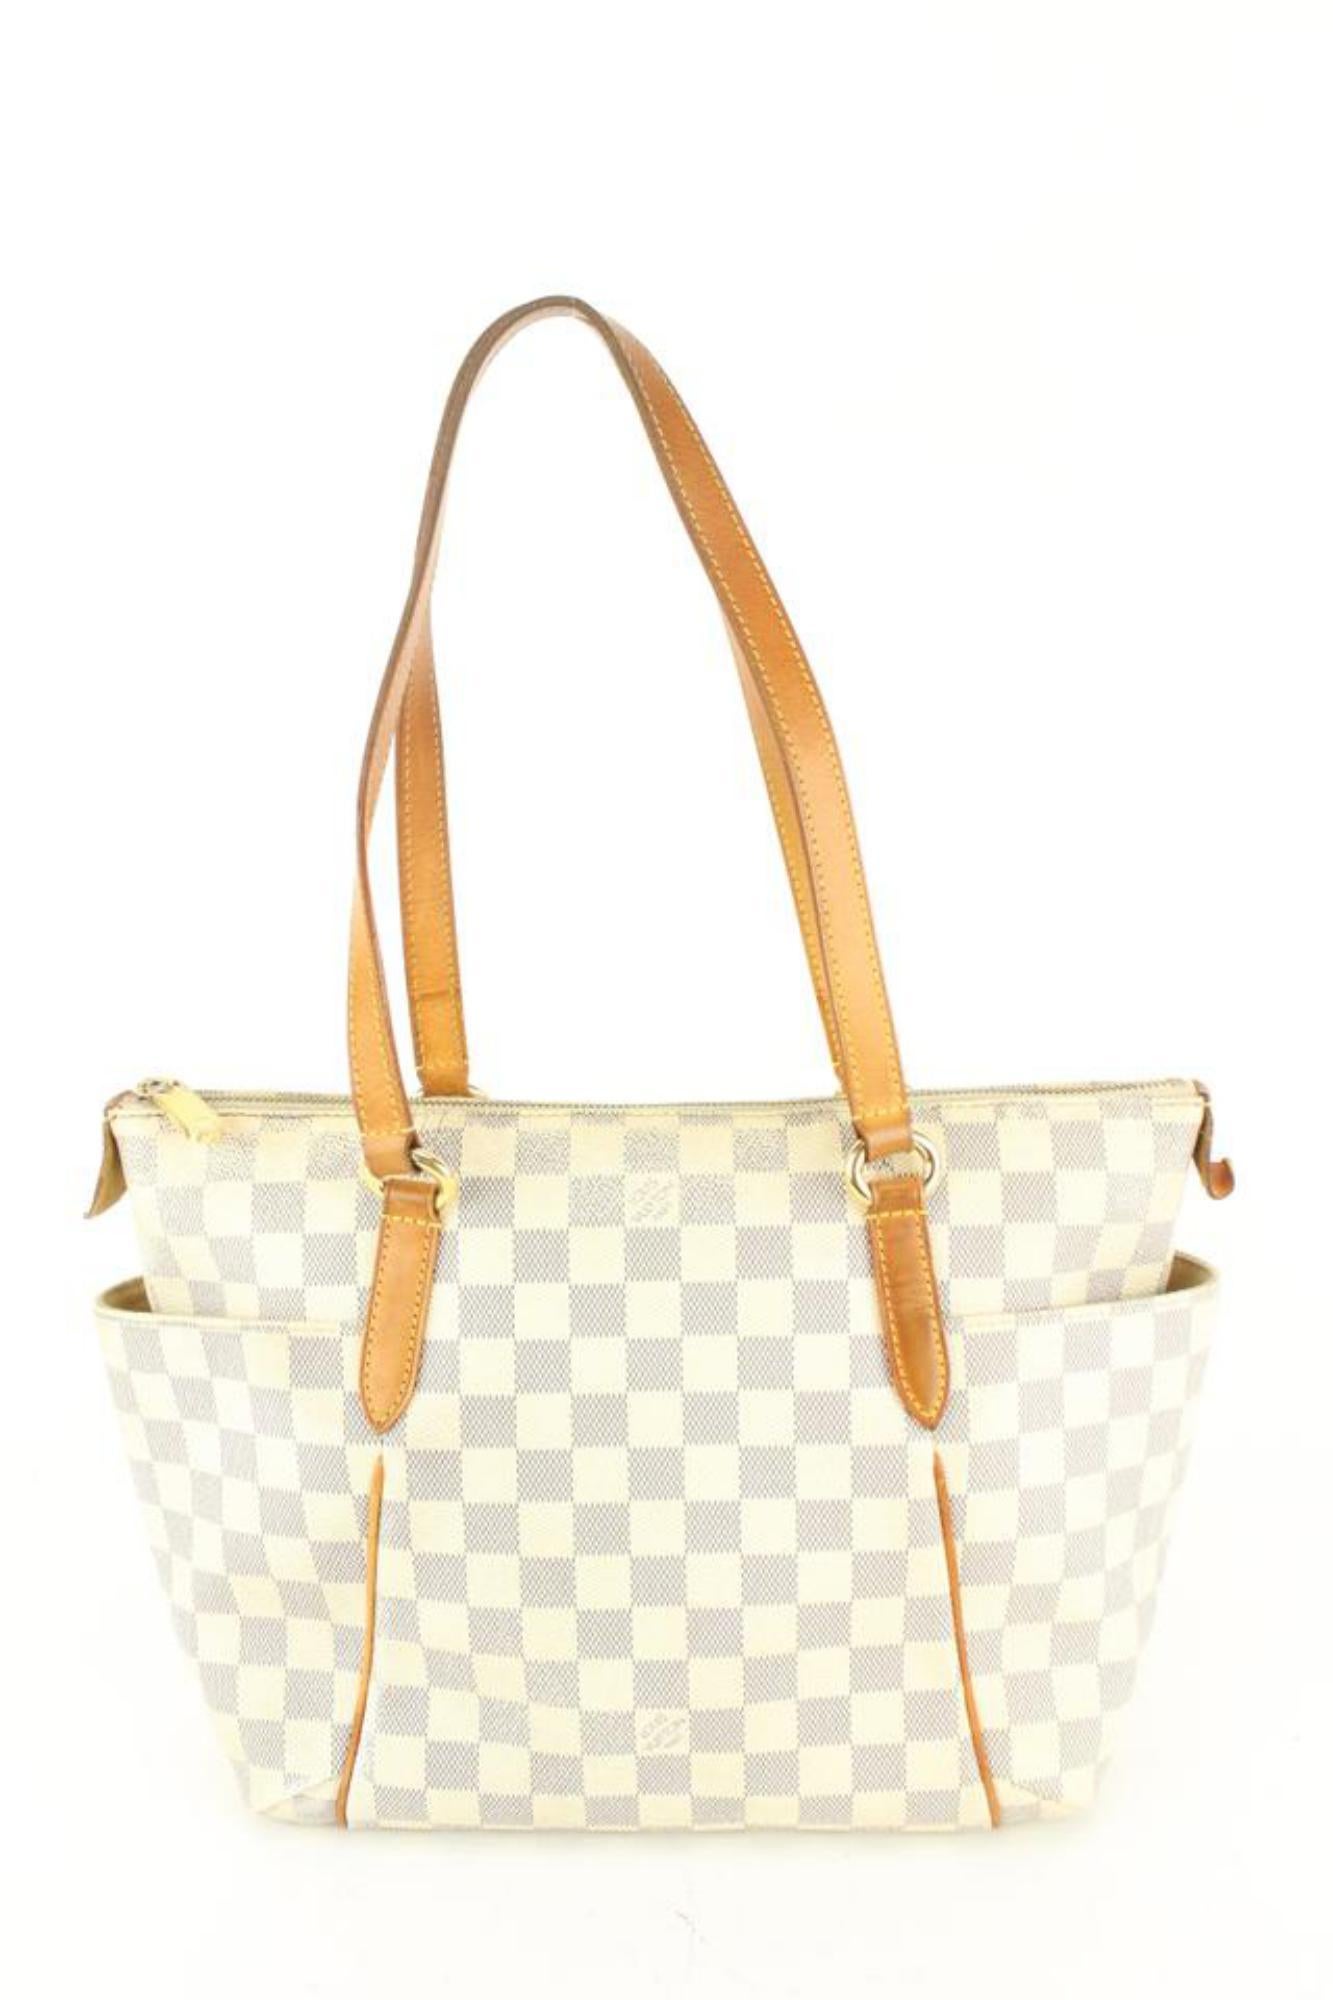 Louis Vuitton Damier Azur Totally PM Tote Bag 83lk67s For Sale 1